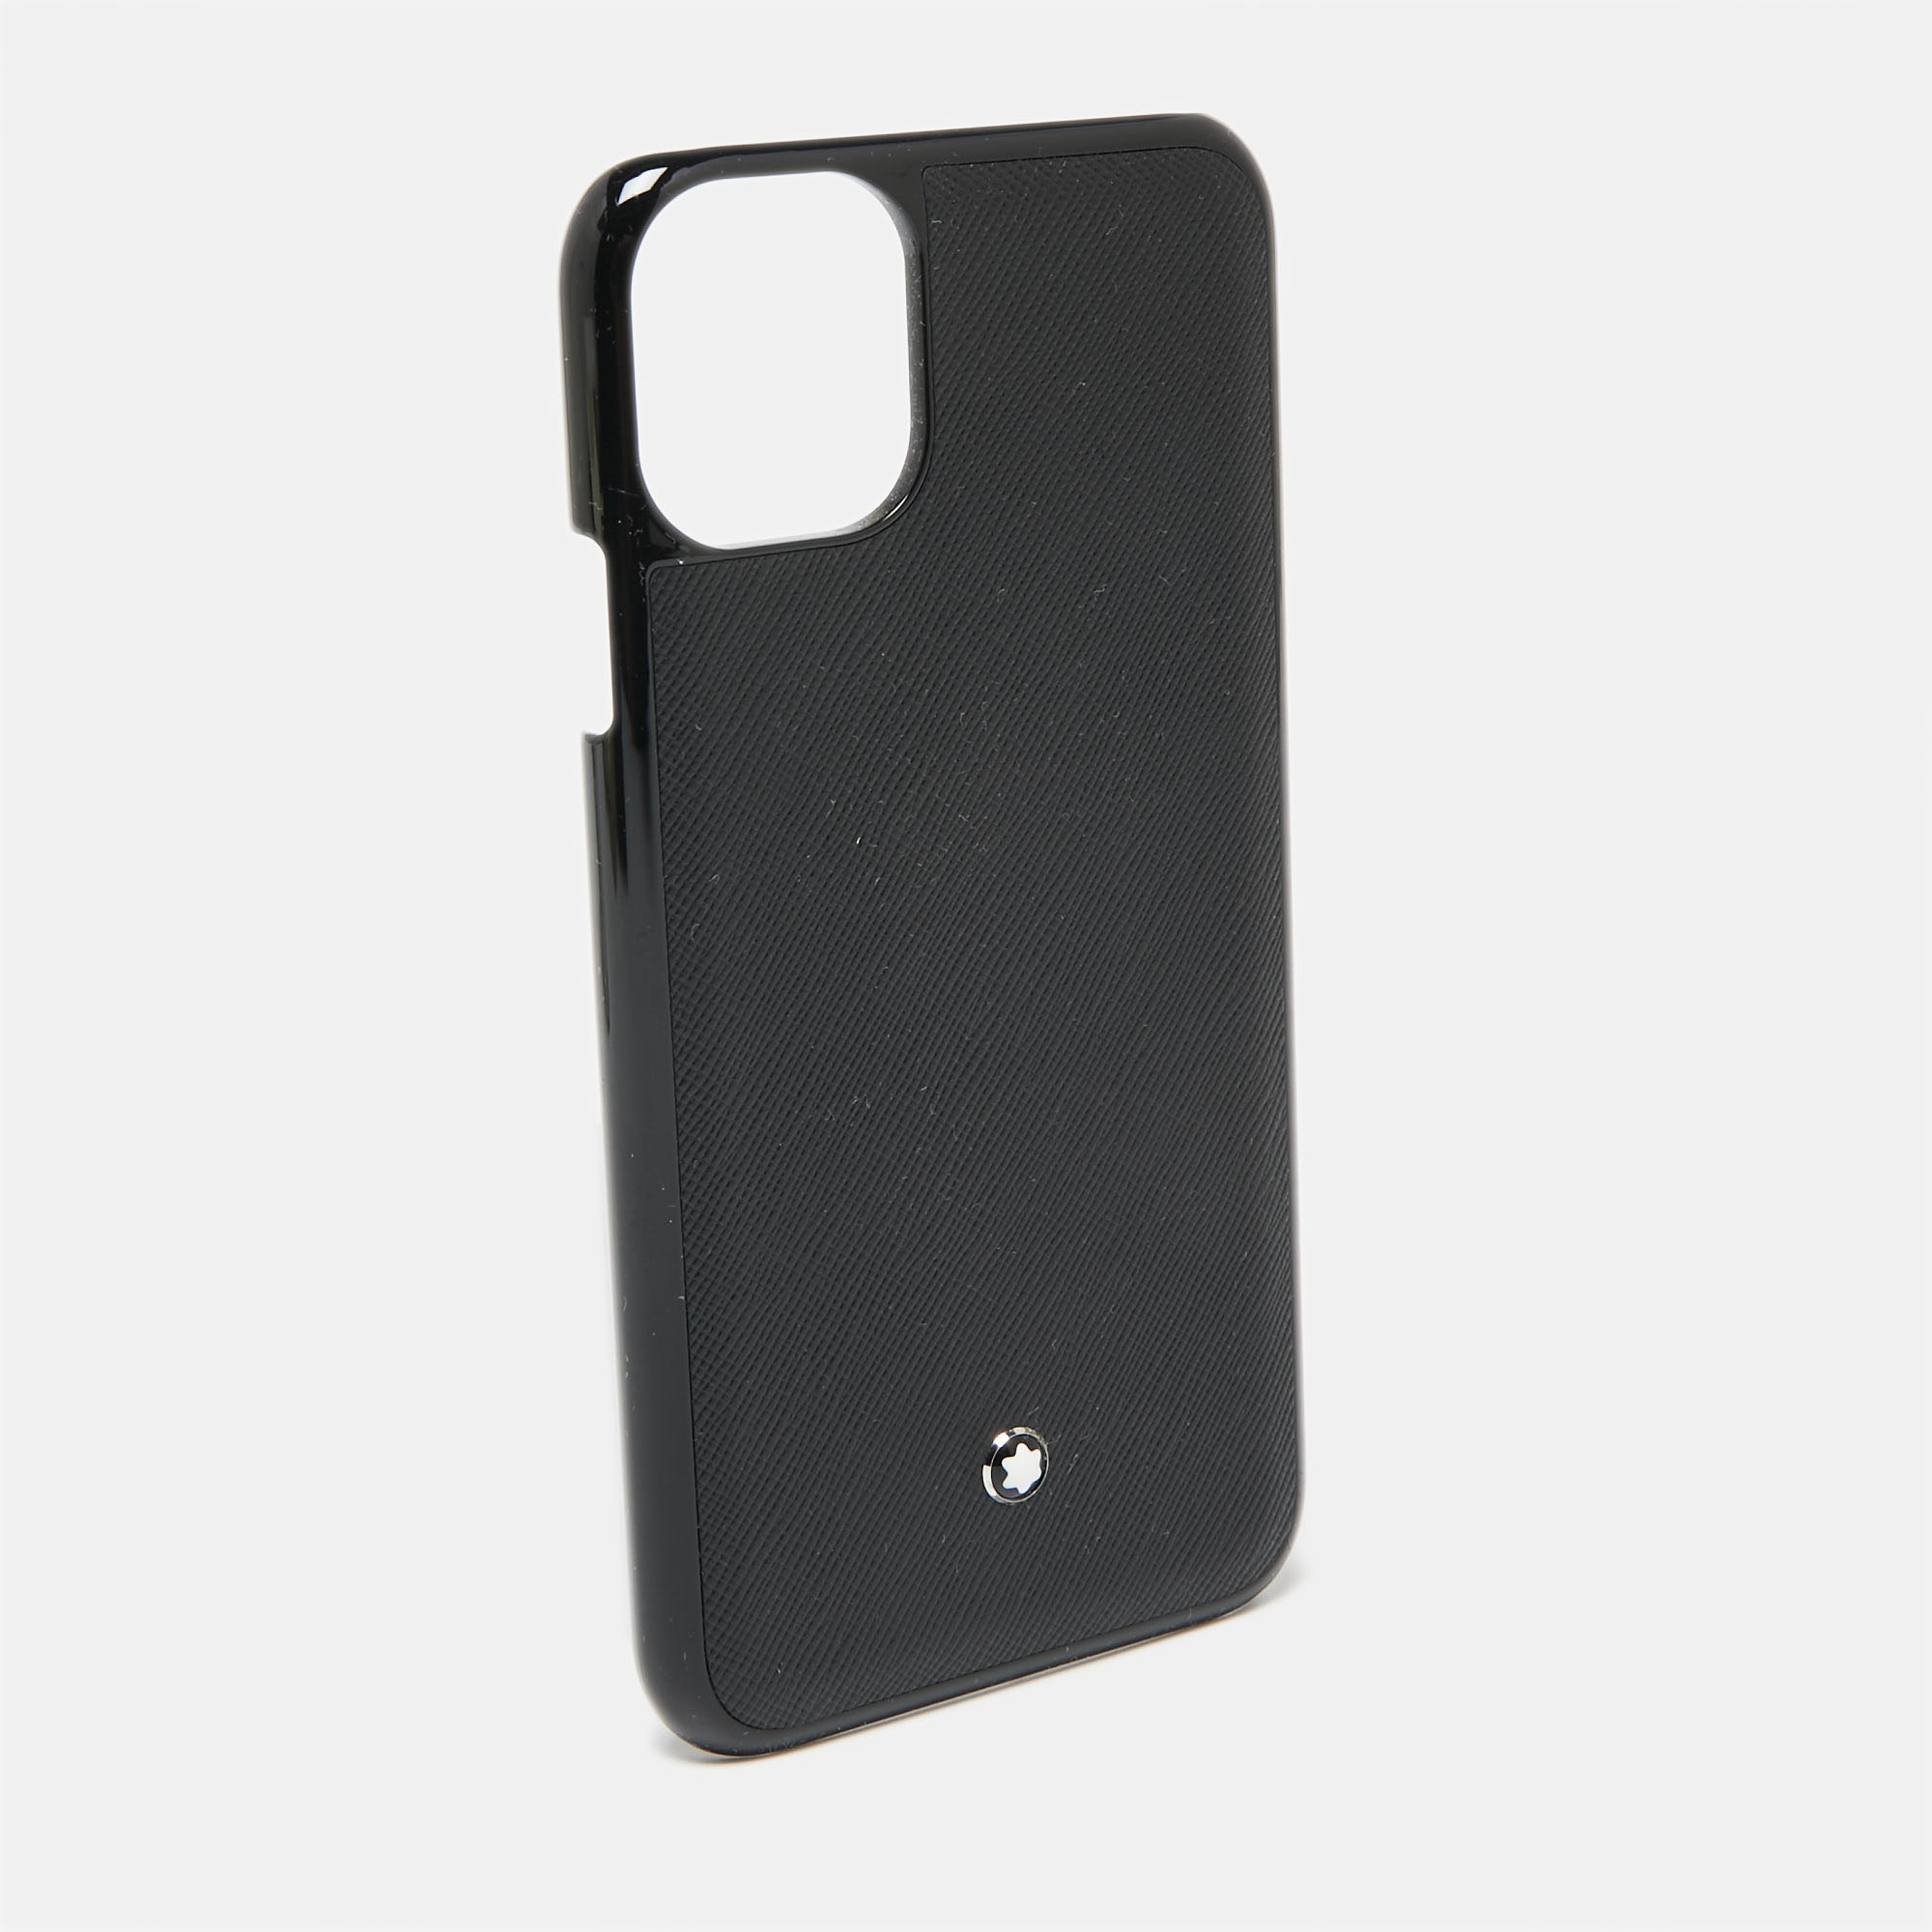 

Montblanc Black Leather and Plastic Sactorial iPhone 11 Case